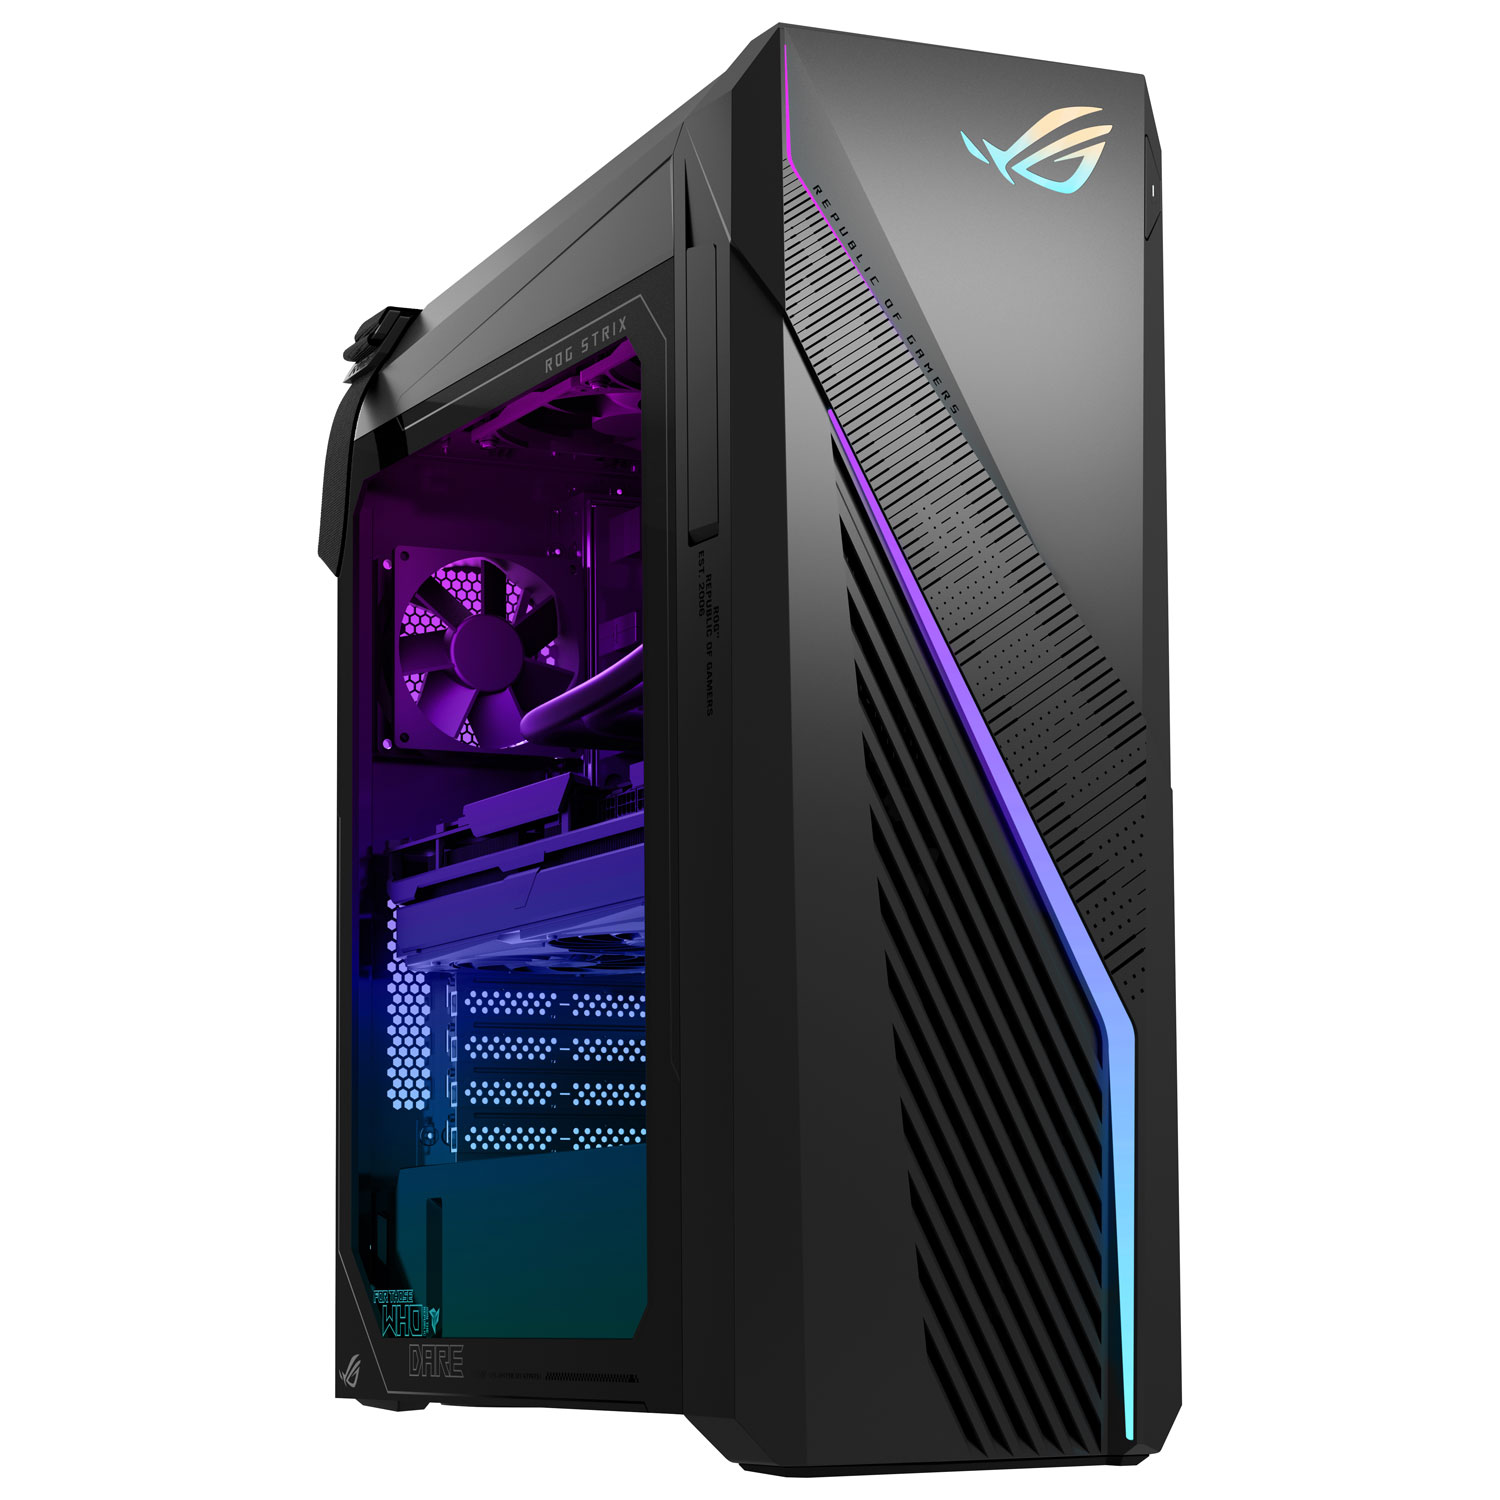 ASUS ROG G16CHR Gaming PC - Grey (Intel Core i7-14700F/1TB SSD/32GB RAM/RTX 4070/Win 11) - Only at Best Buy